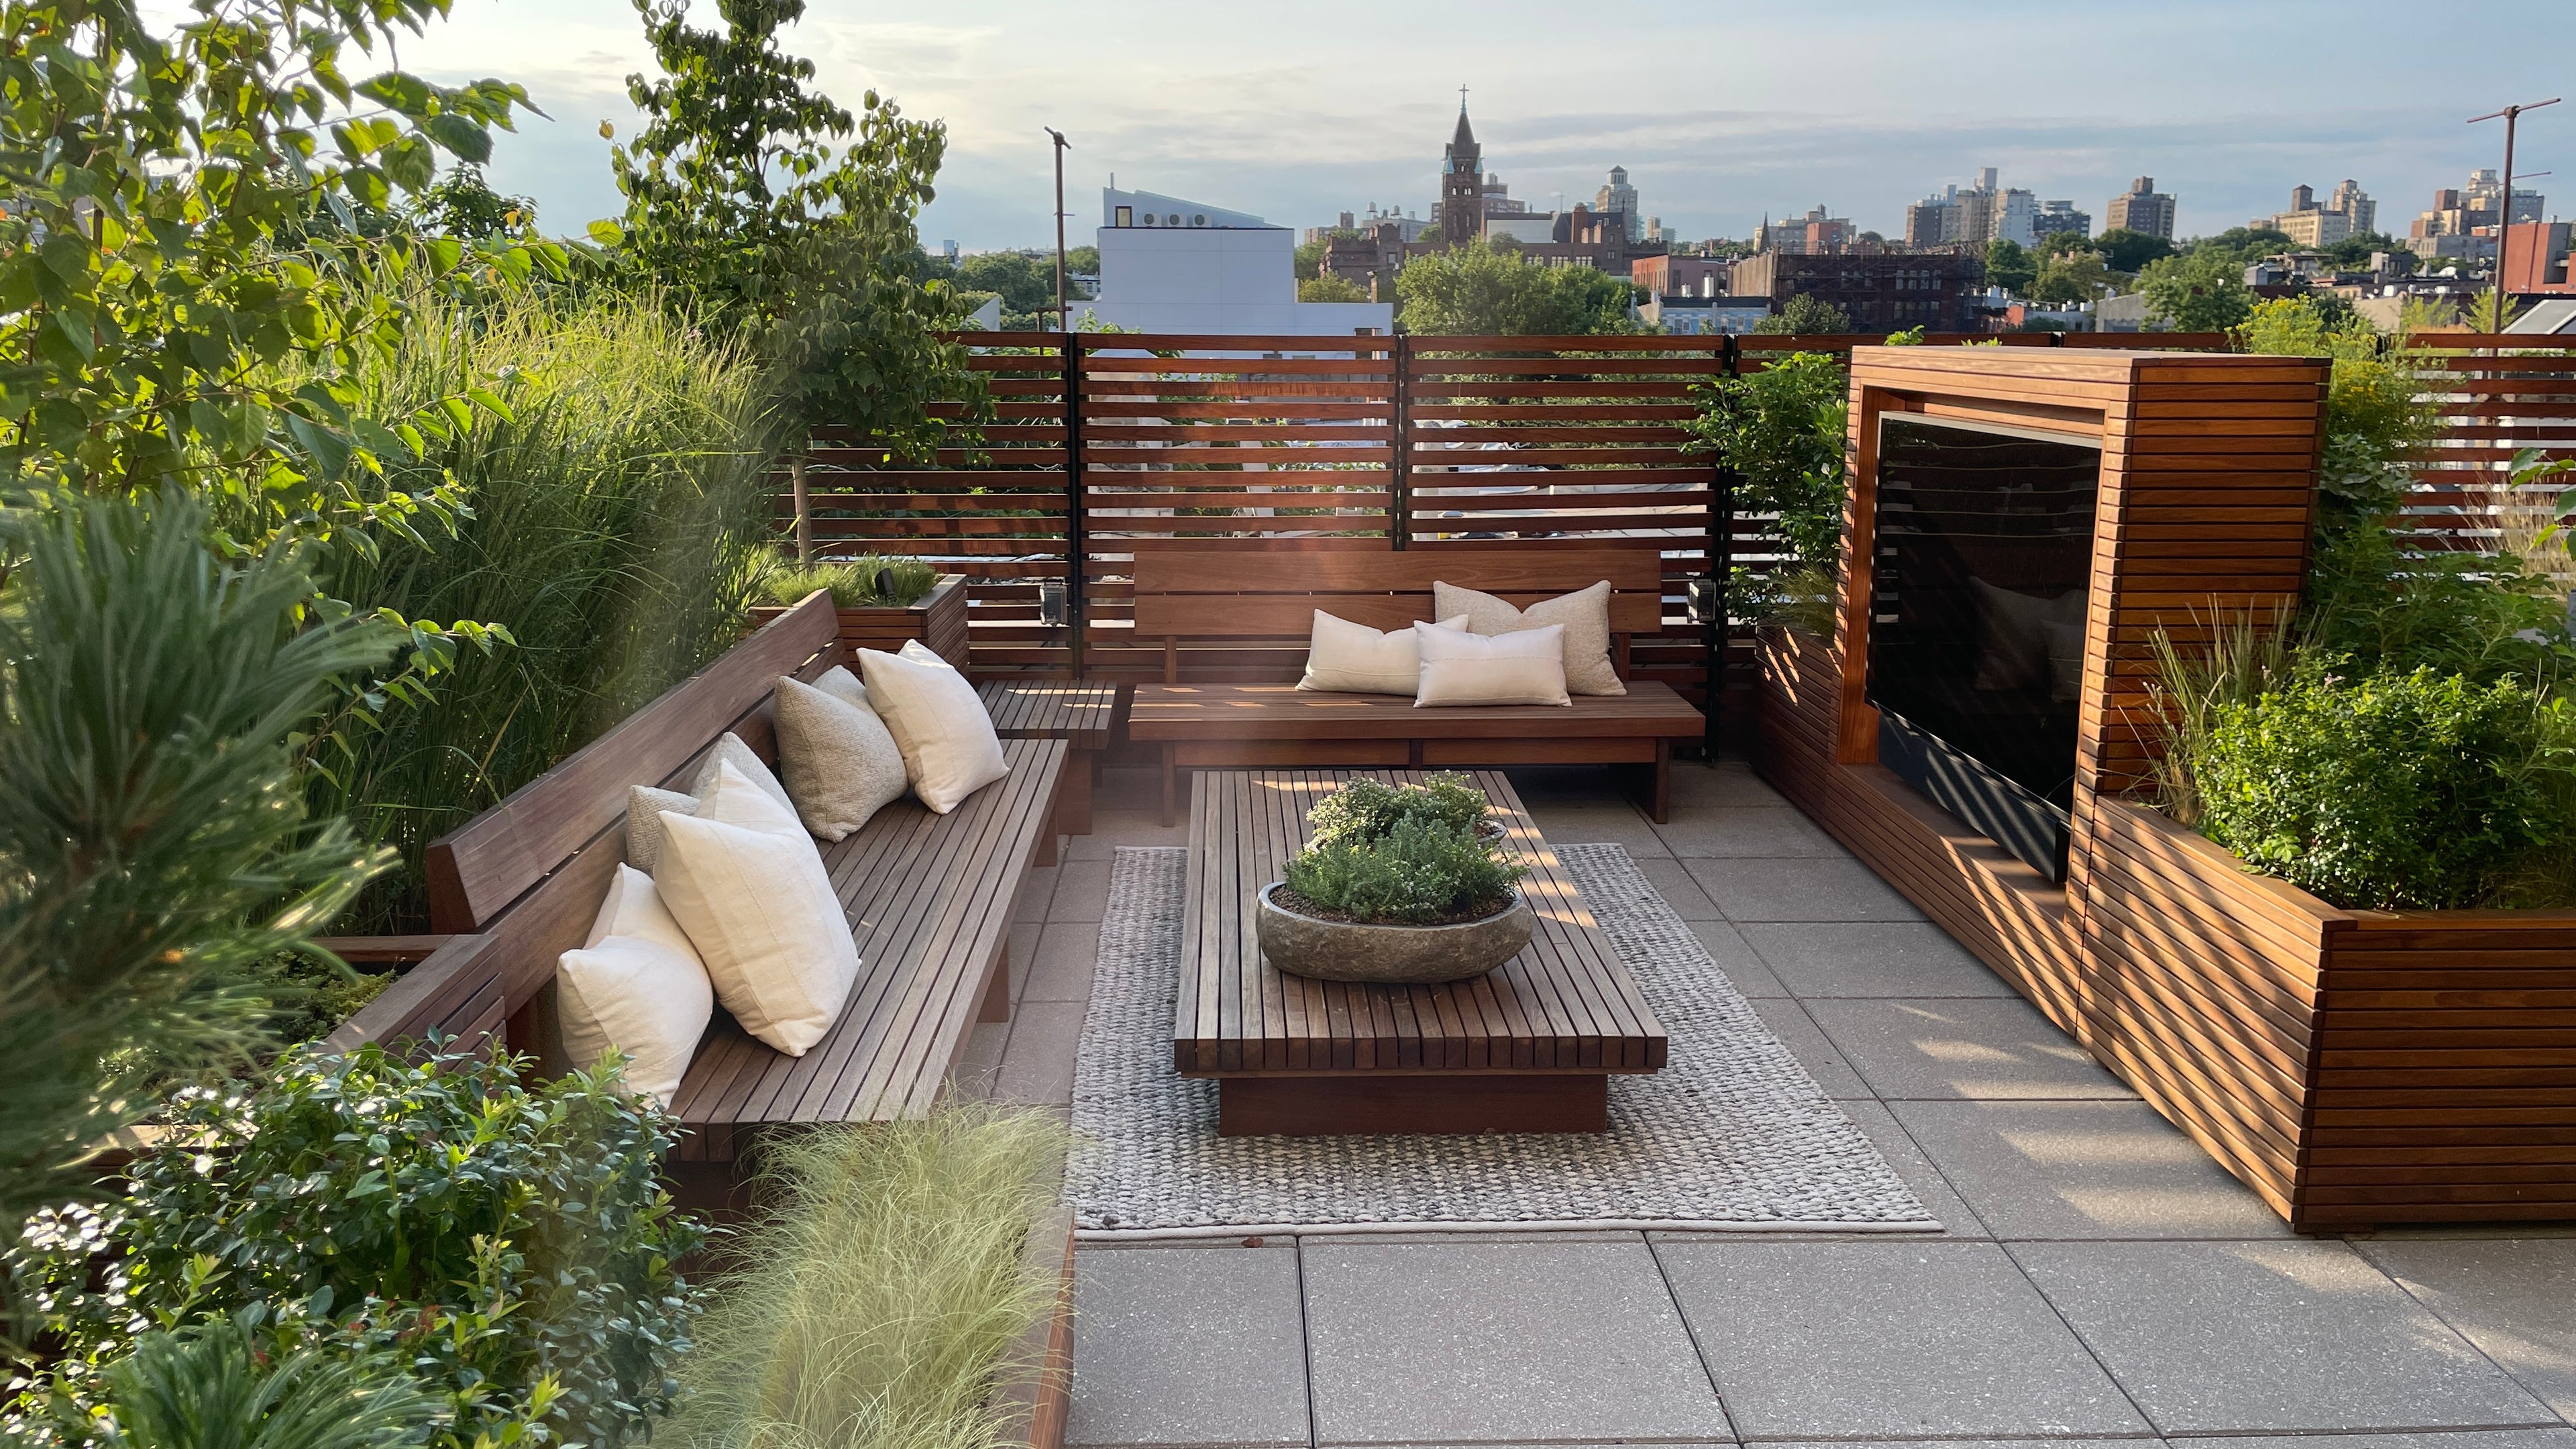 Load video: NYC Rooftop Remodel in Collaboration with Huntergreen